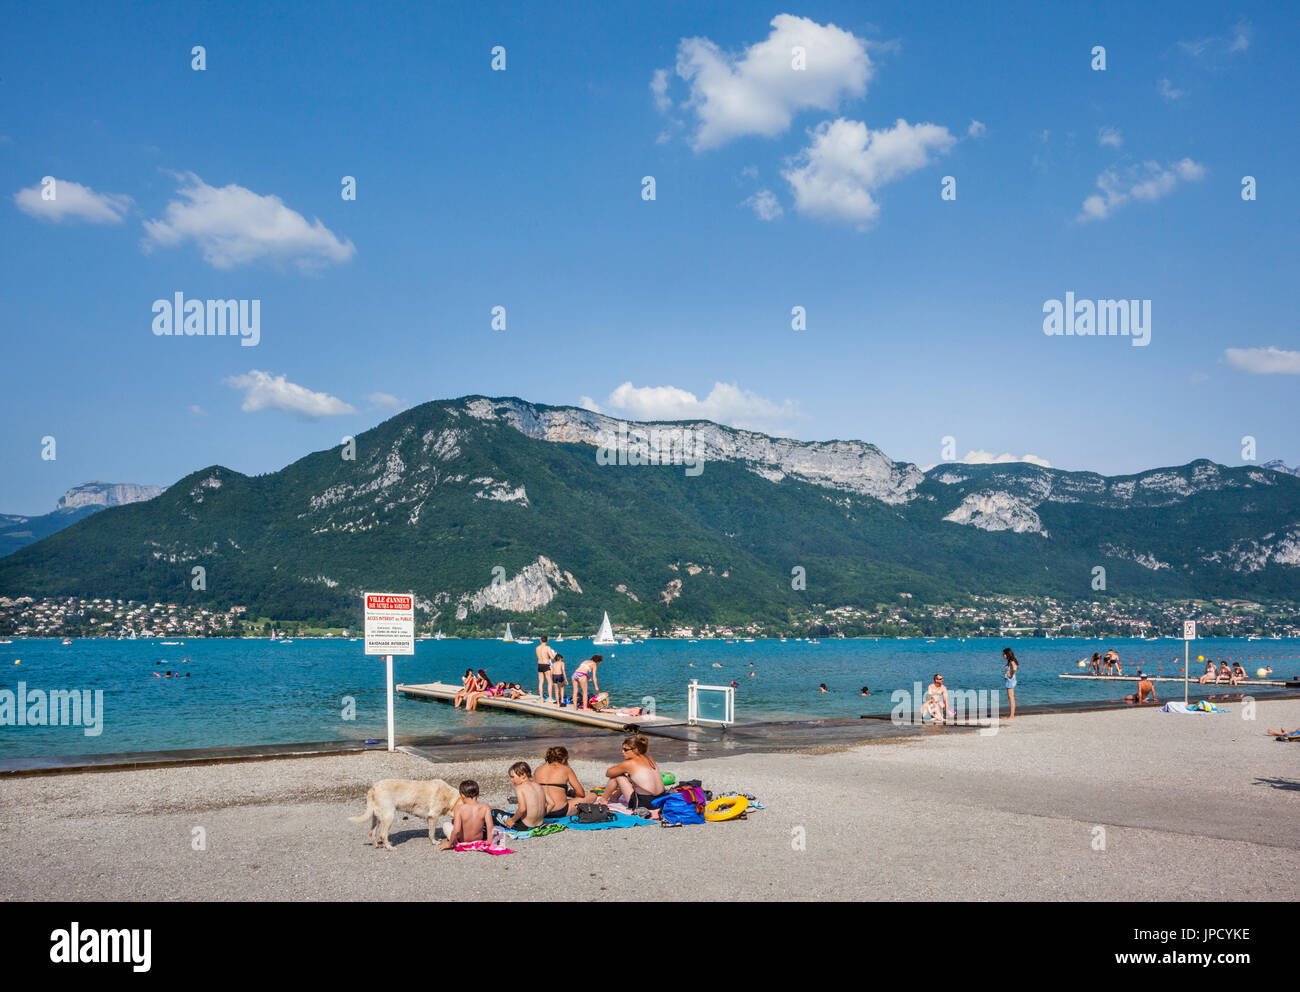 France, Annecy, sunseekers on the shores of Lake Annecy at Marquisats Nautical Base enjoy a sunny summer day Stock Photo